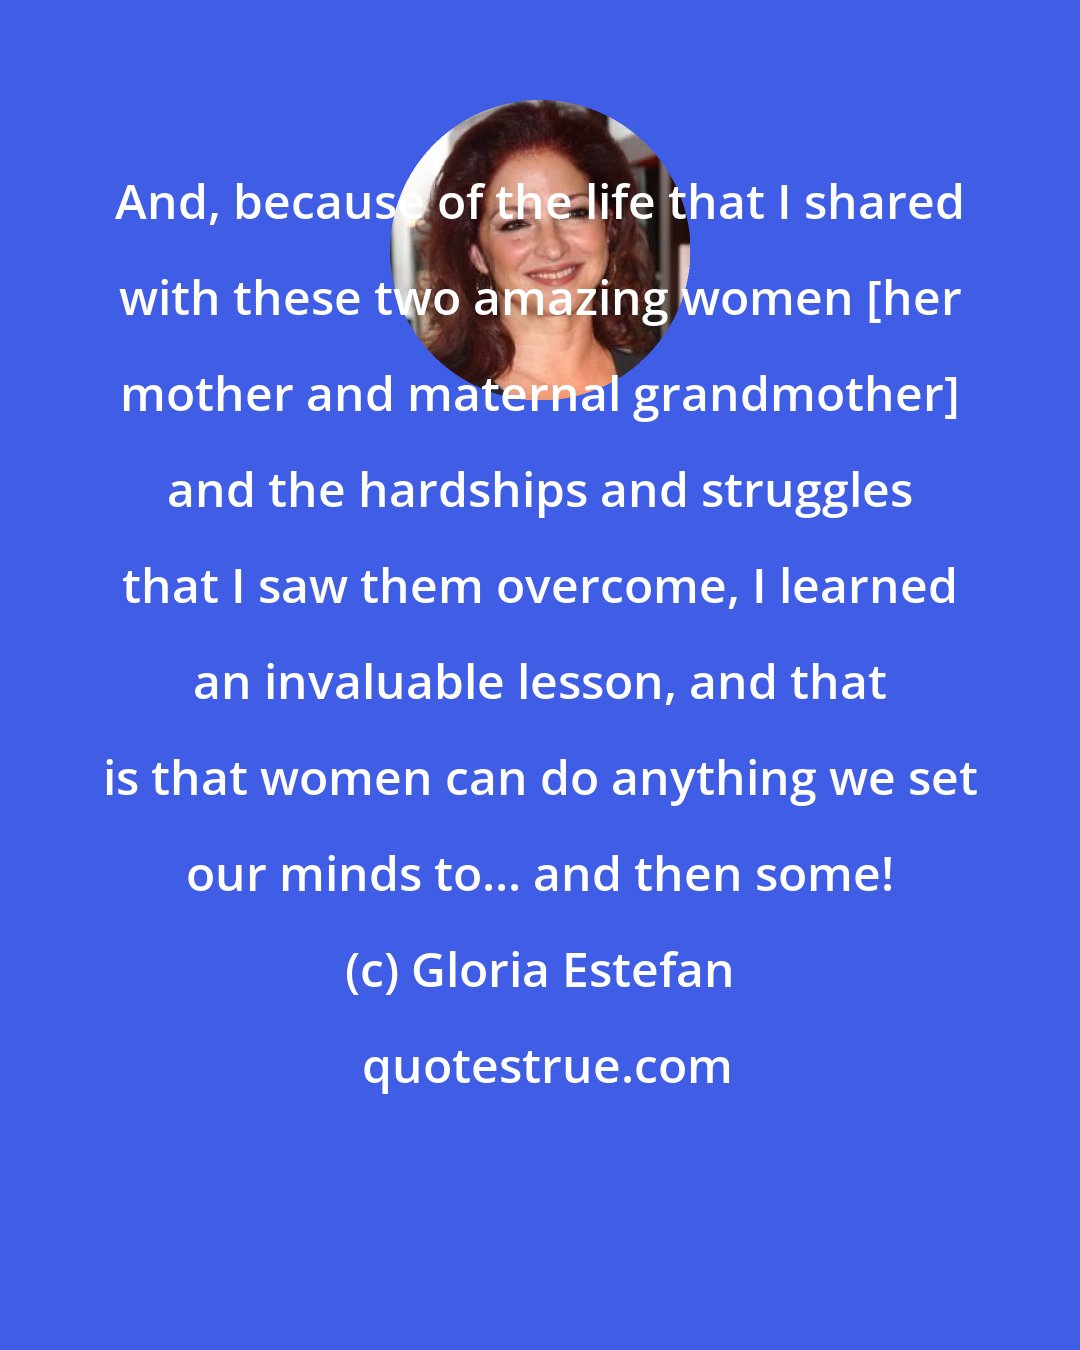 Gloria Estefan: And, because of the life that I shared with these two amazing women [her mother and maternal grandmother] and the hardships and struggles that I saw them overcome, I learned an invaluable lesson, and that is that women can do anything we set our minds to... and then some!